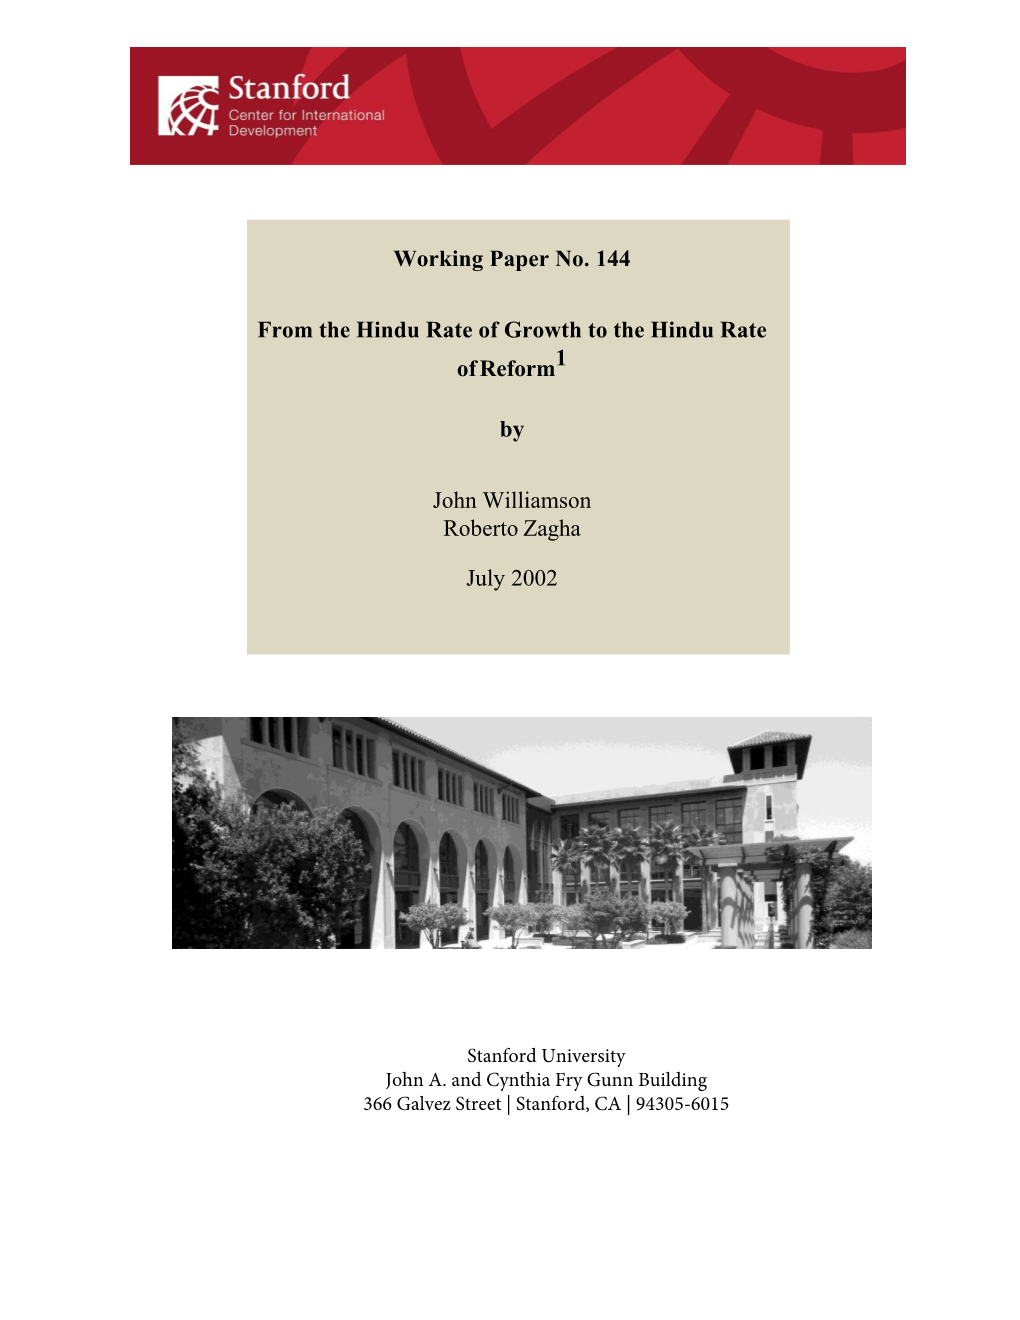 Working Paper No. 144 from the Hindu Rate of Growth to the Hindu